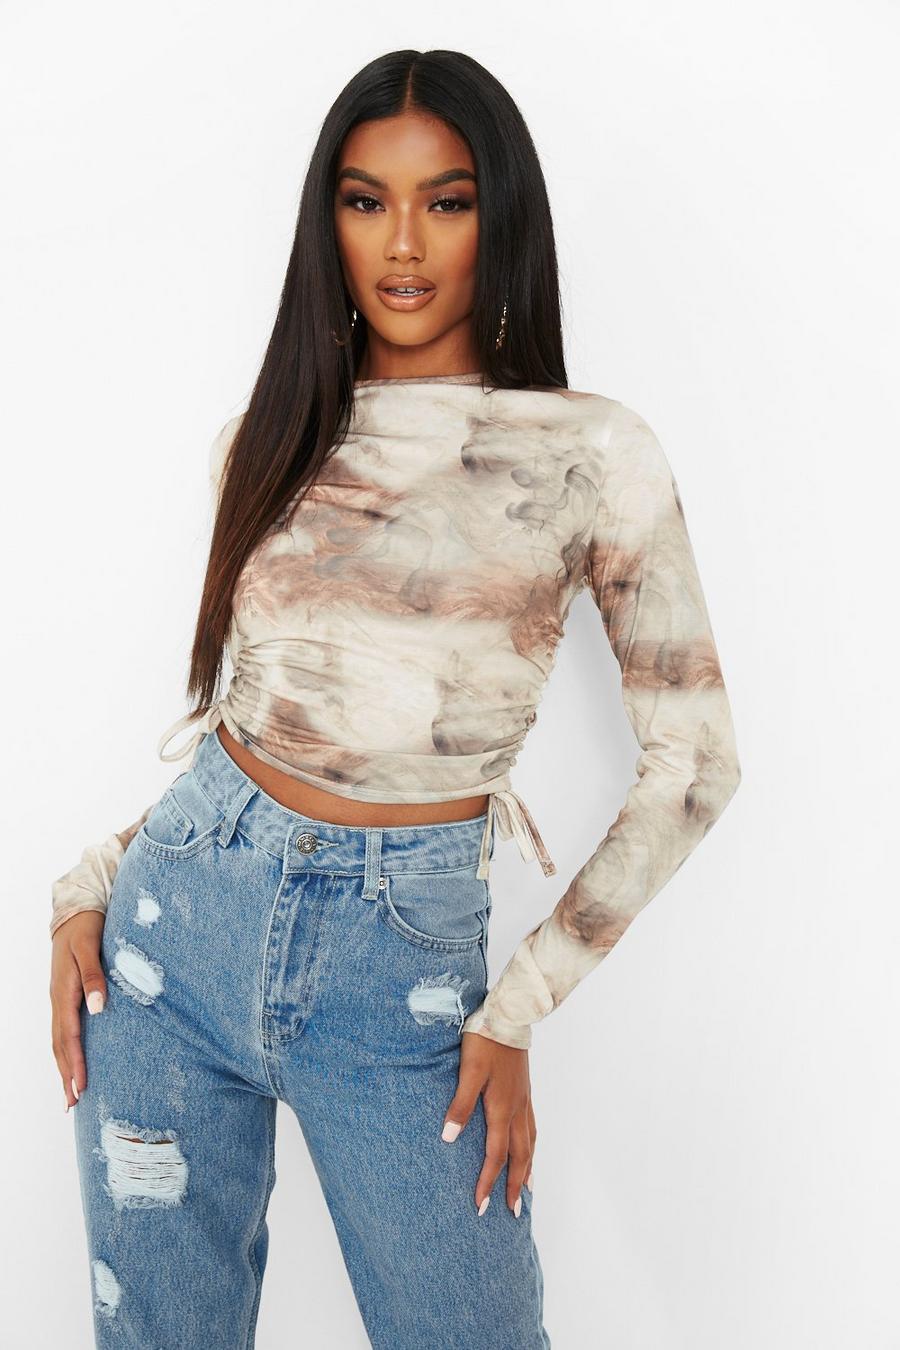 https://media.boohoo.com/i/boohoo/fzz46875_nude_xl/female-nude-marble-print-ruched-side-long-sleeve-crop-top/?w=900&qlt=default&fmt.jp2.qlt=70&fmt=auto&sm=fit